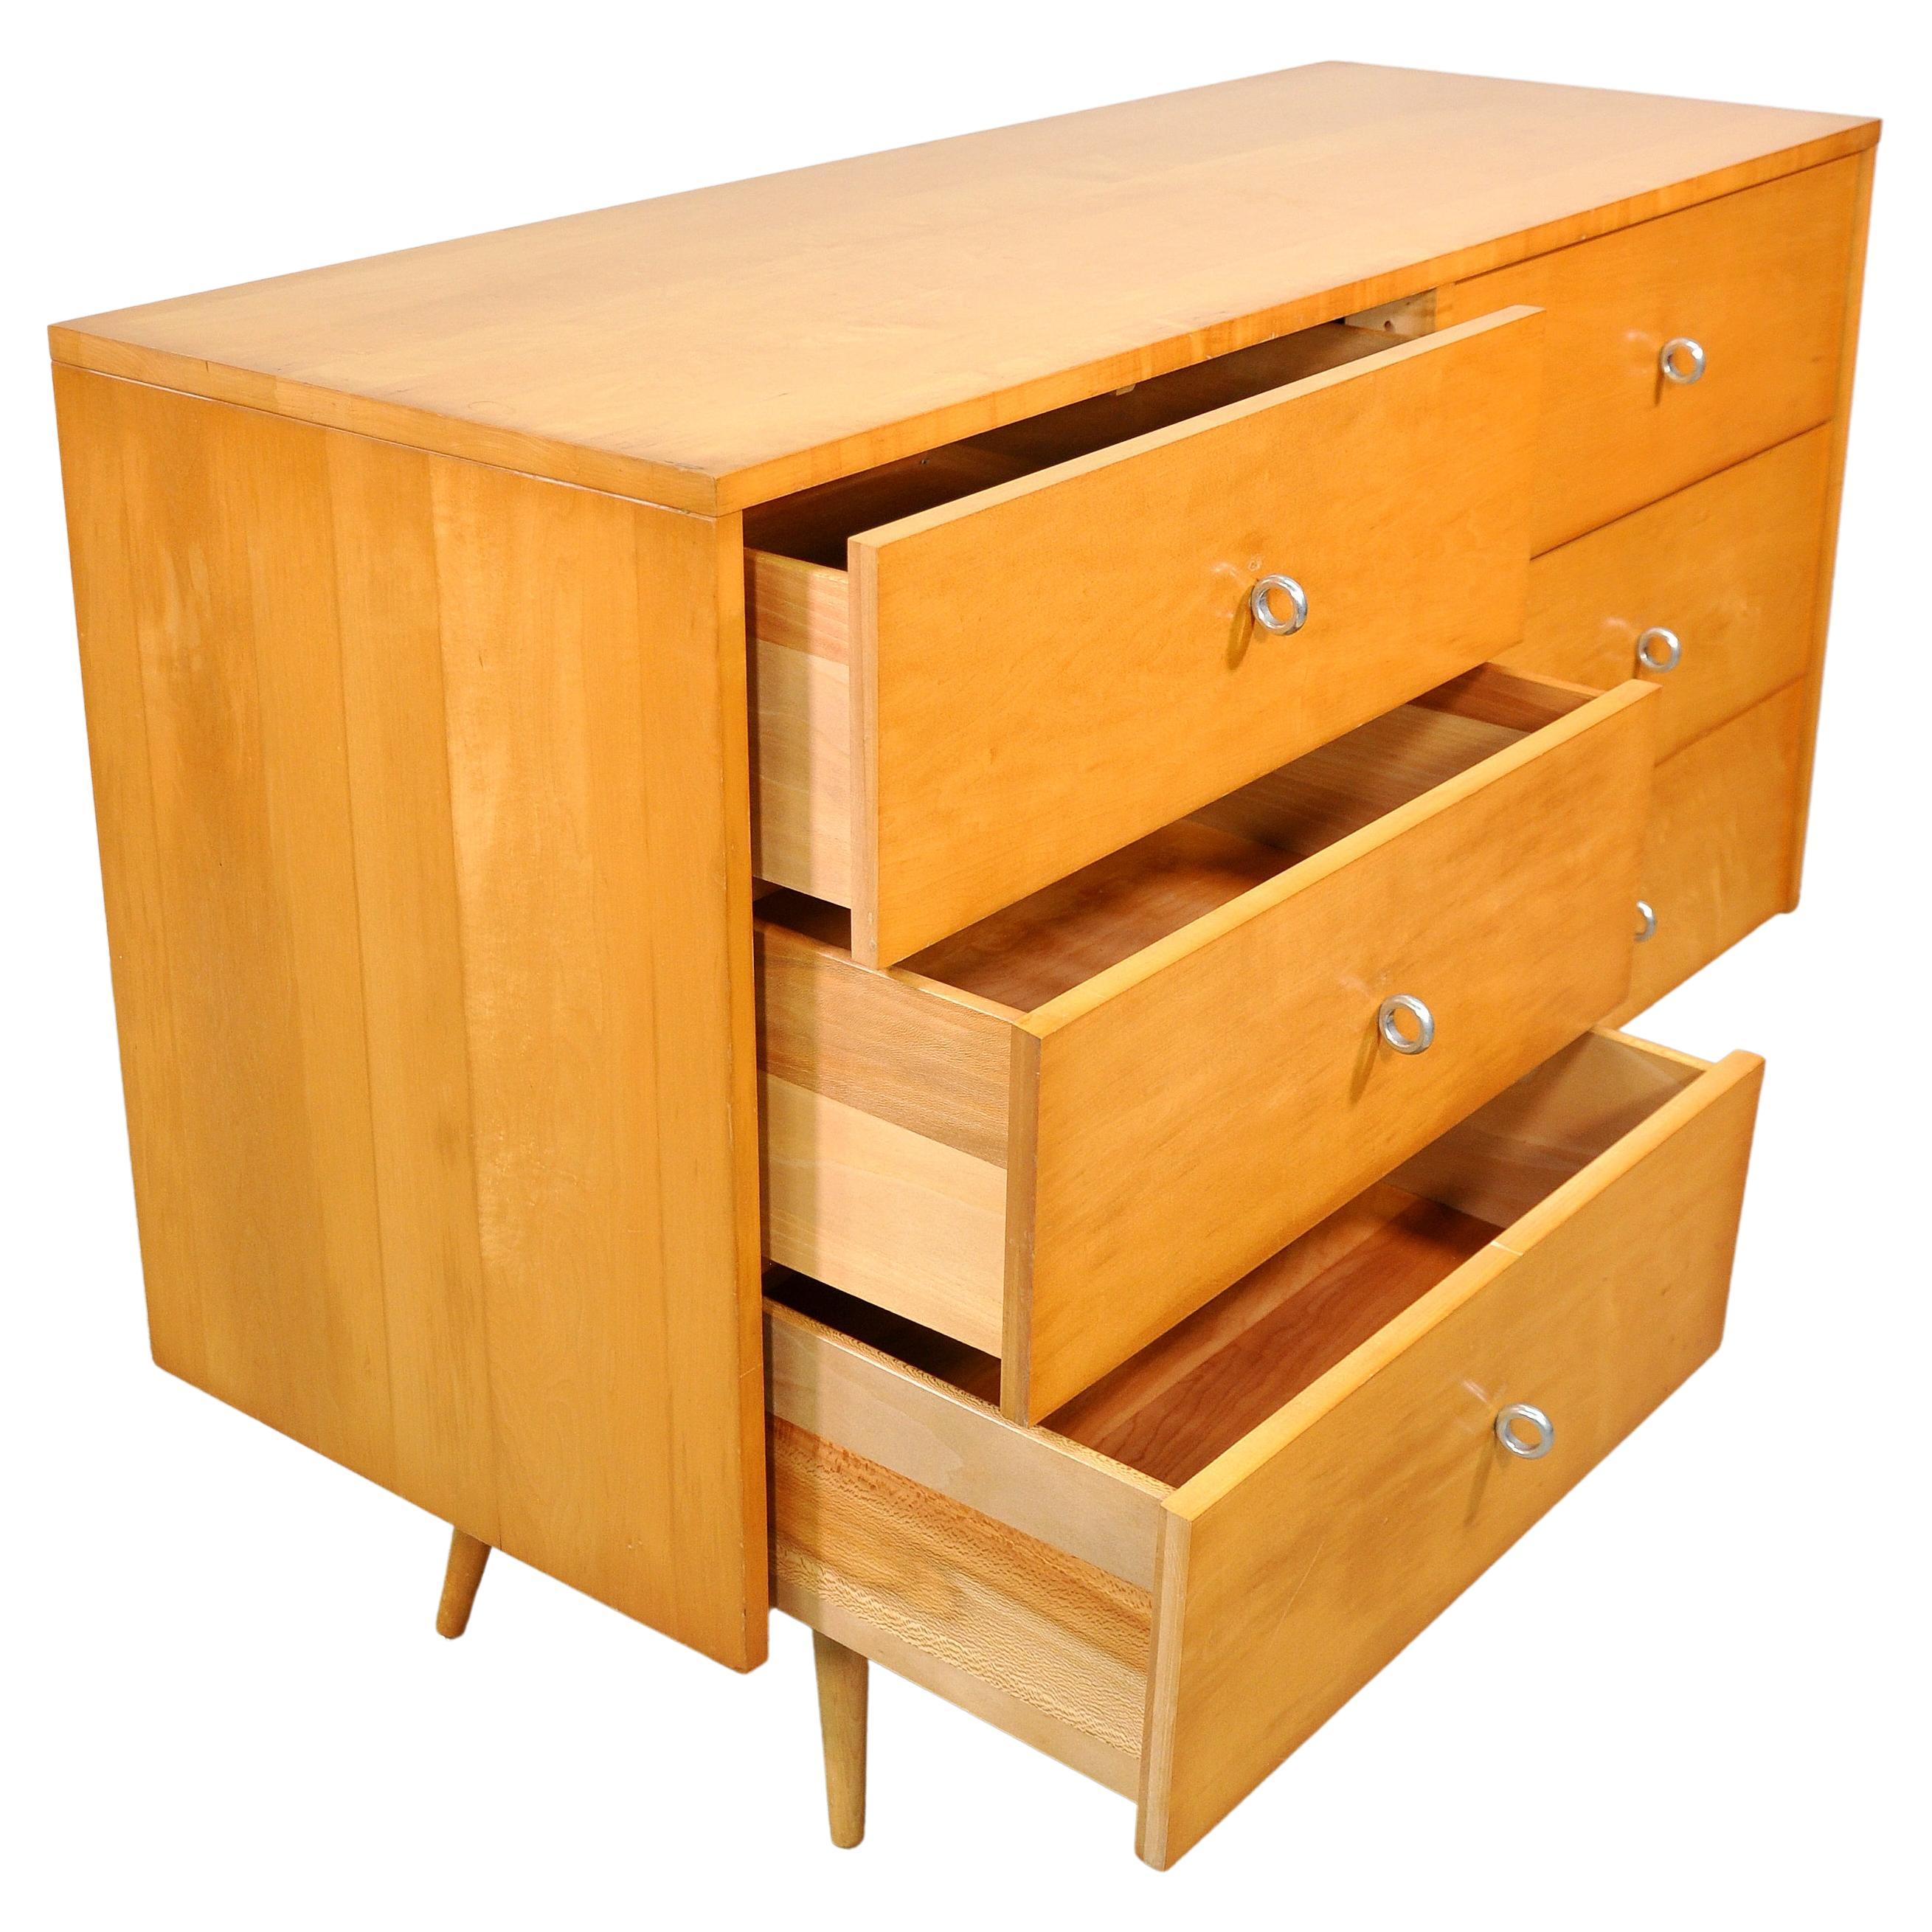 Mid-20th Century Paul McCobb Maple Double Dresser Planner Group by Winchendon Furniture, 1950s For Sale